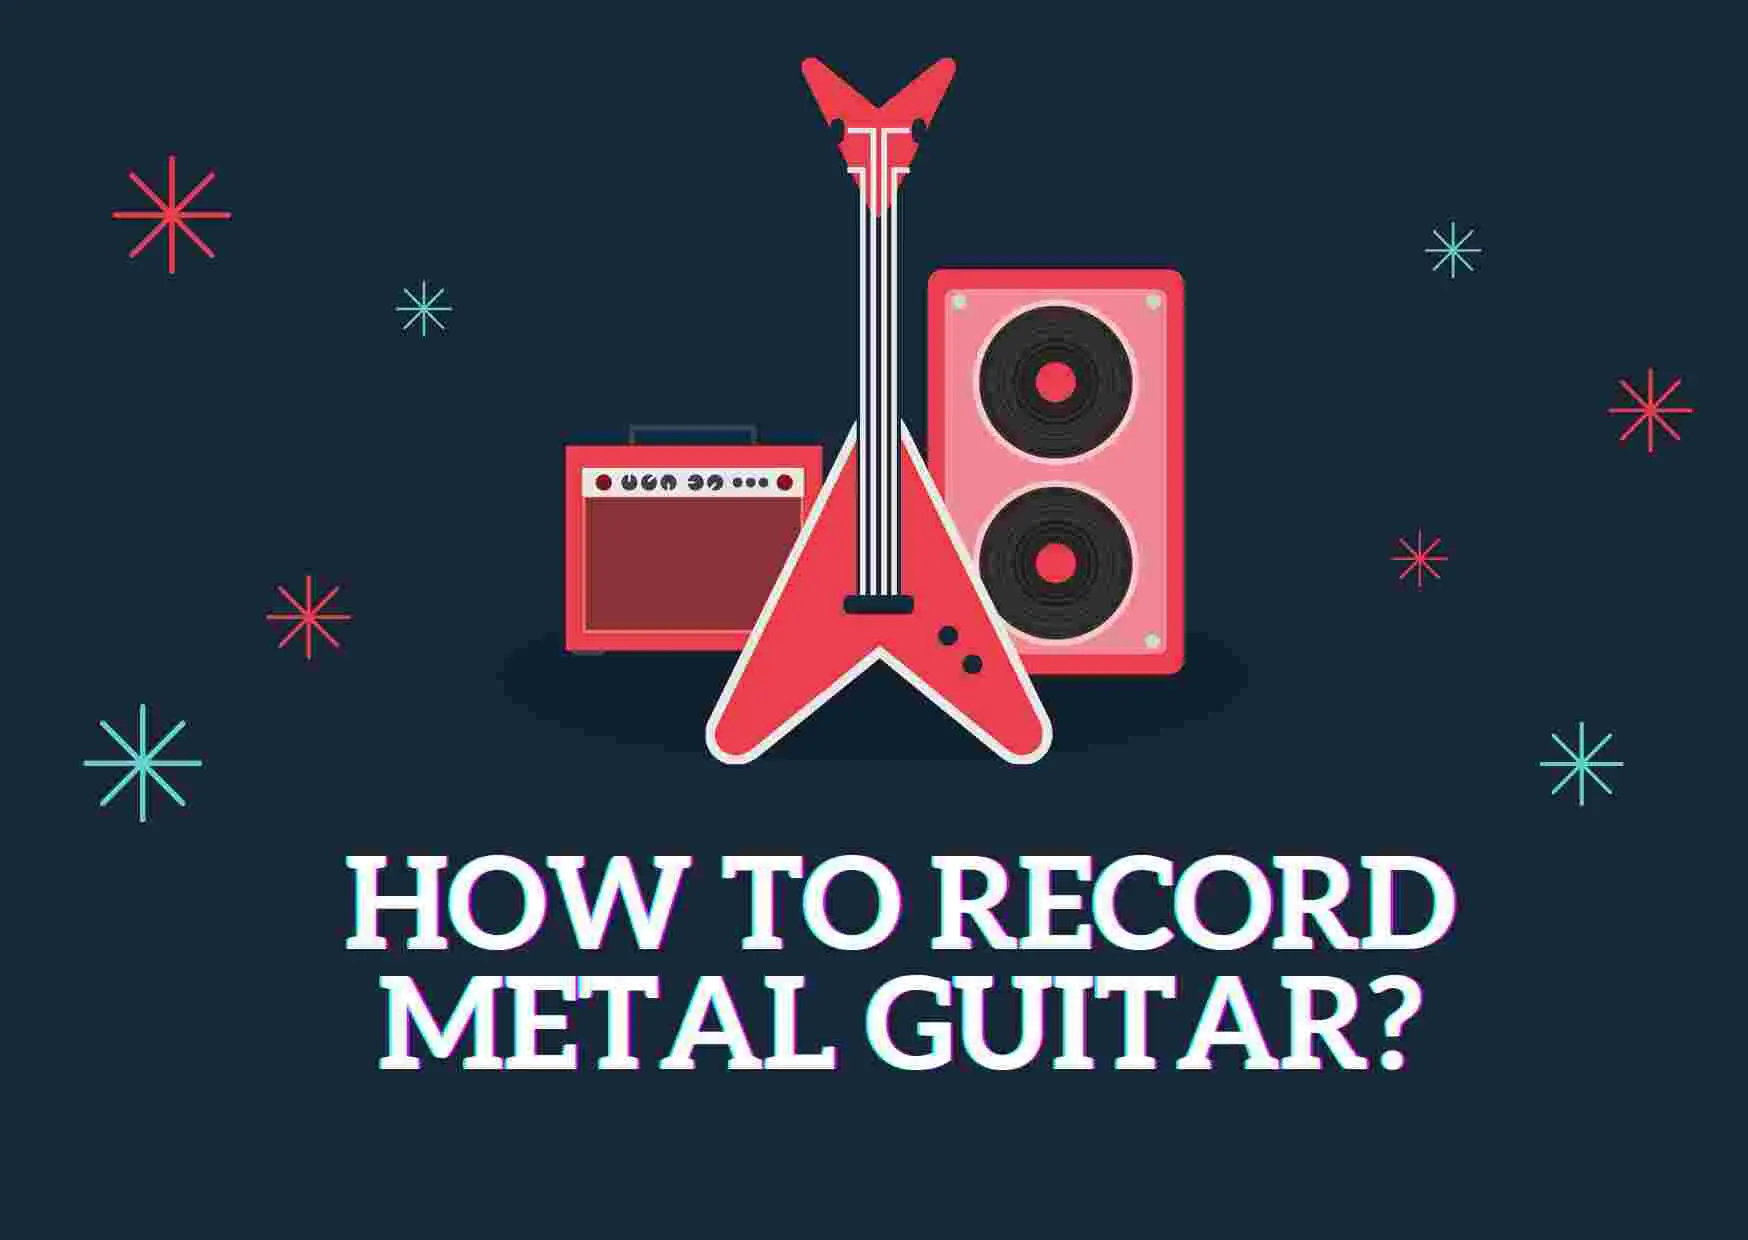 How to record metal guitar